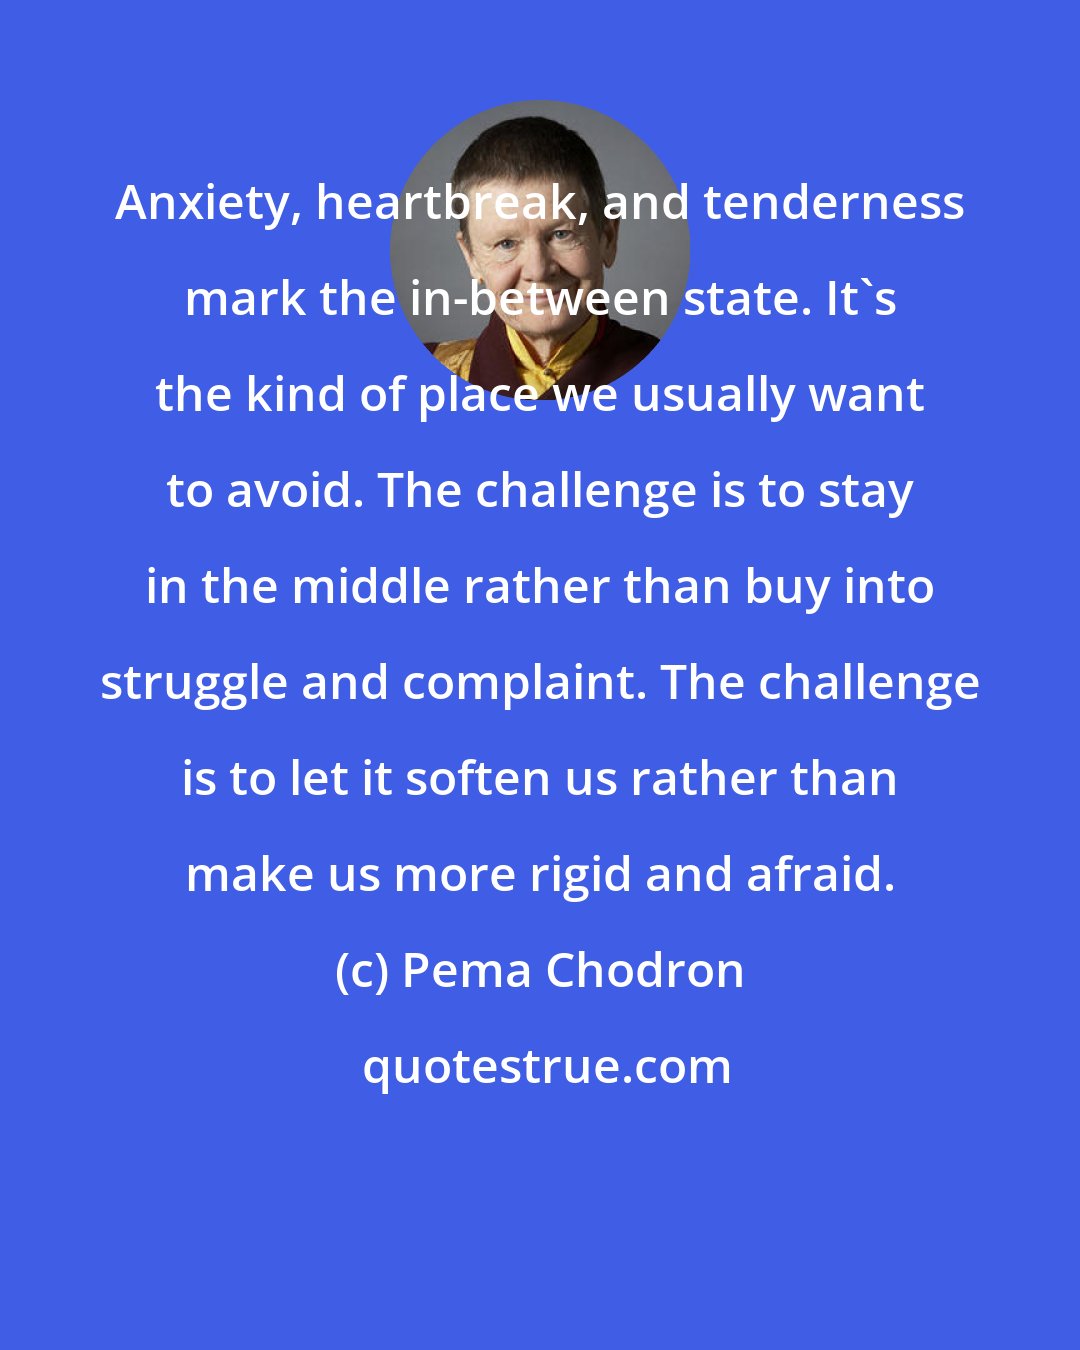 Pema Chodron: Anxiety, heartbreak, and tenderness mark the in-between state. It's the kind of place we usually want to avoid. The challenge is to stay in the middle rather than buy into struggle and complaint. The challenge is to let it soften us rather than make us more rigid and afraid.